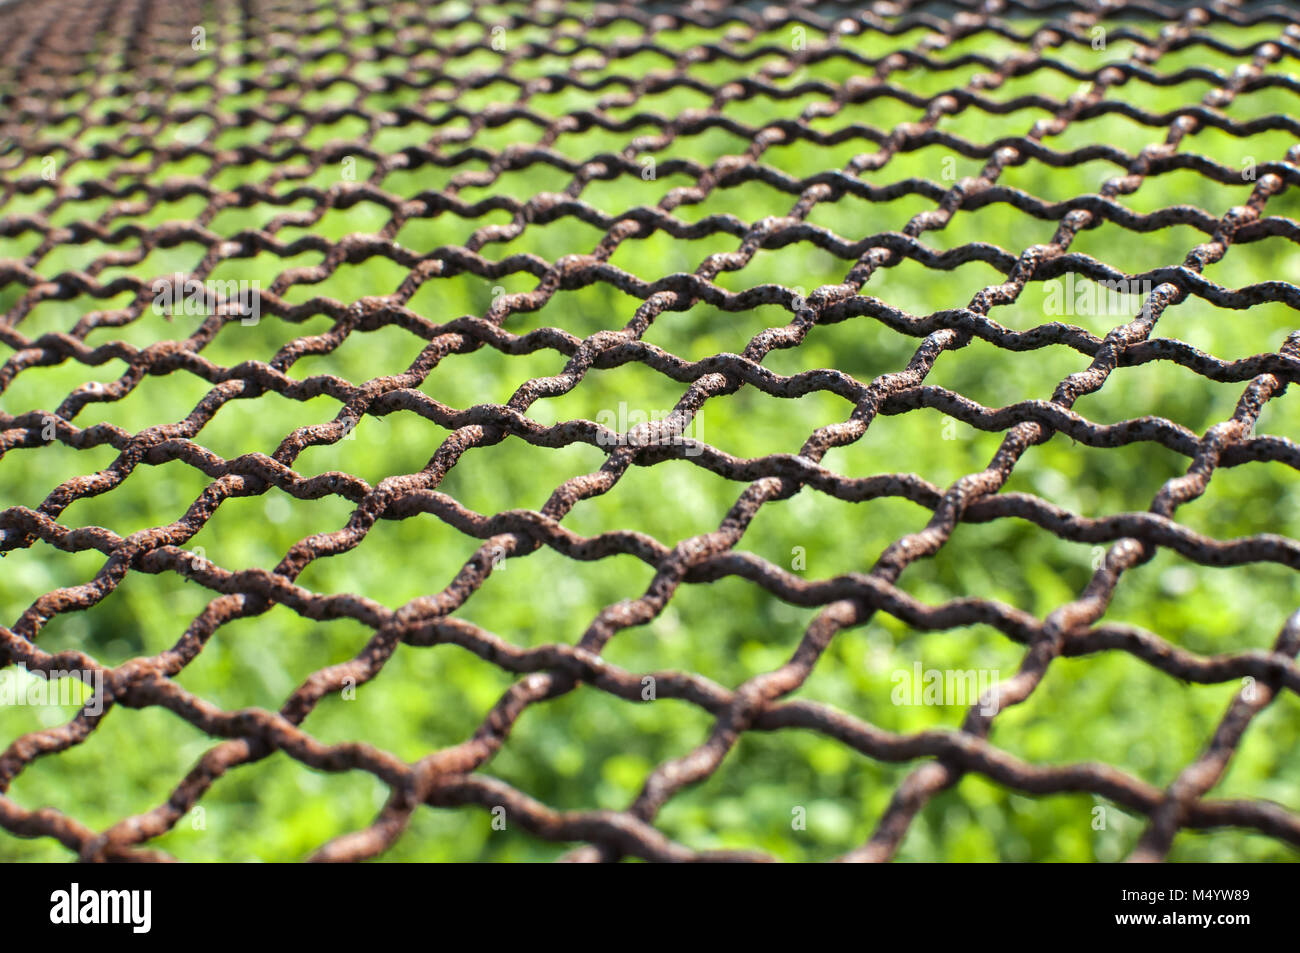 Old weathered wire fencing net Stock Photo